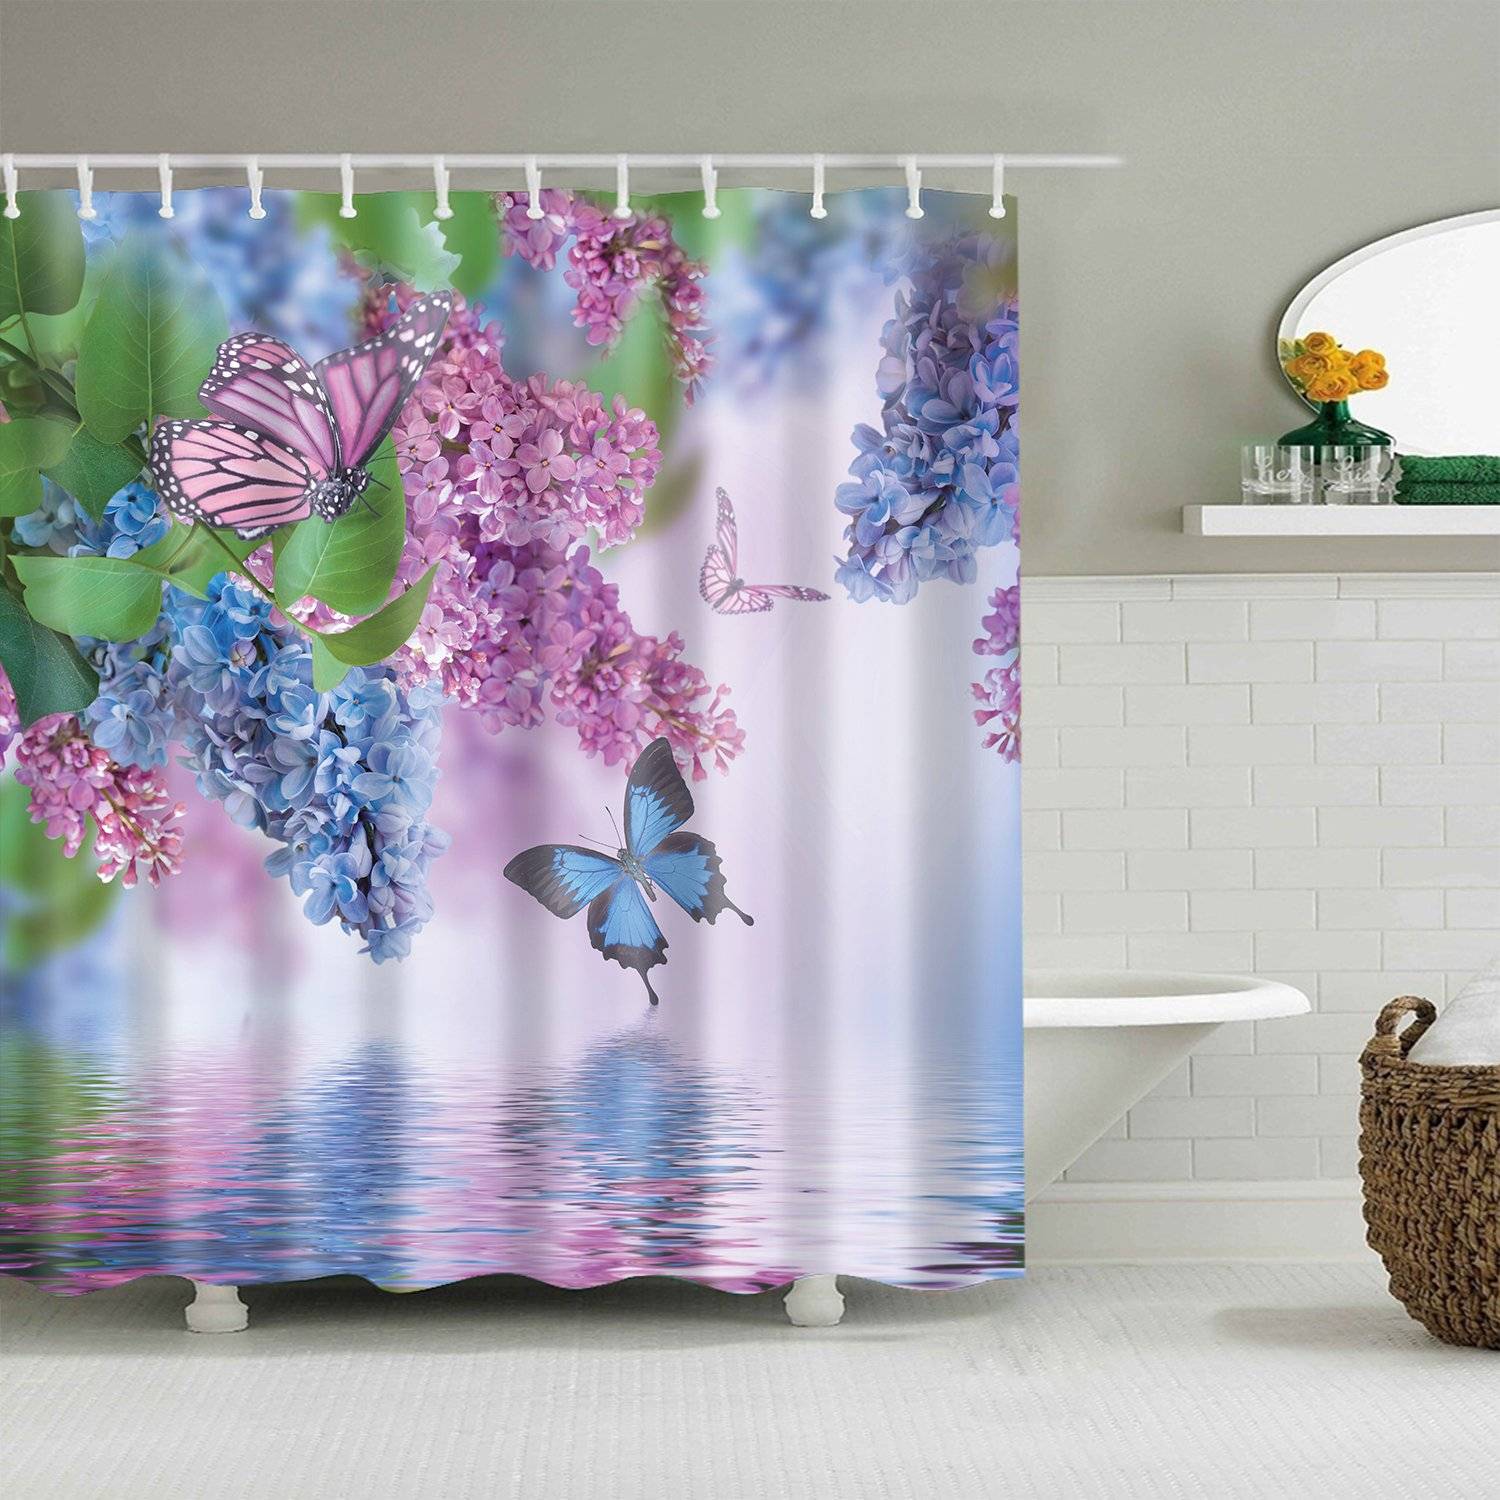 Pink Violet Floral River Butterfly Shower Curtain